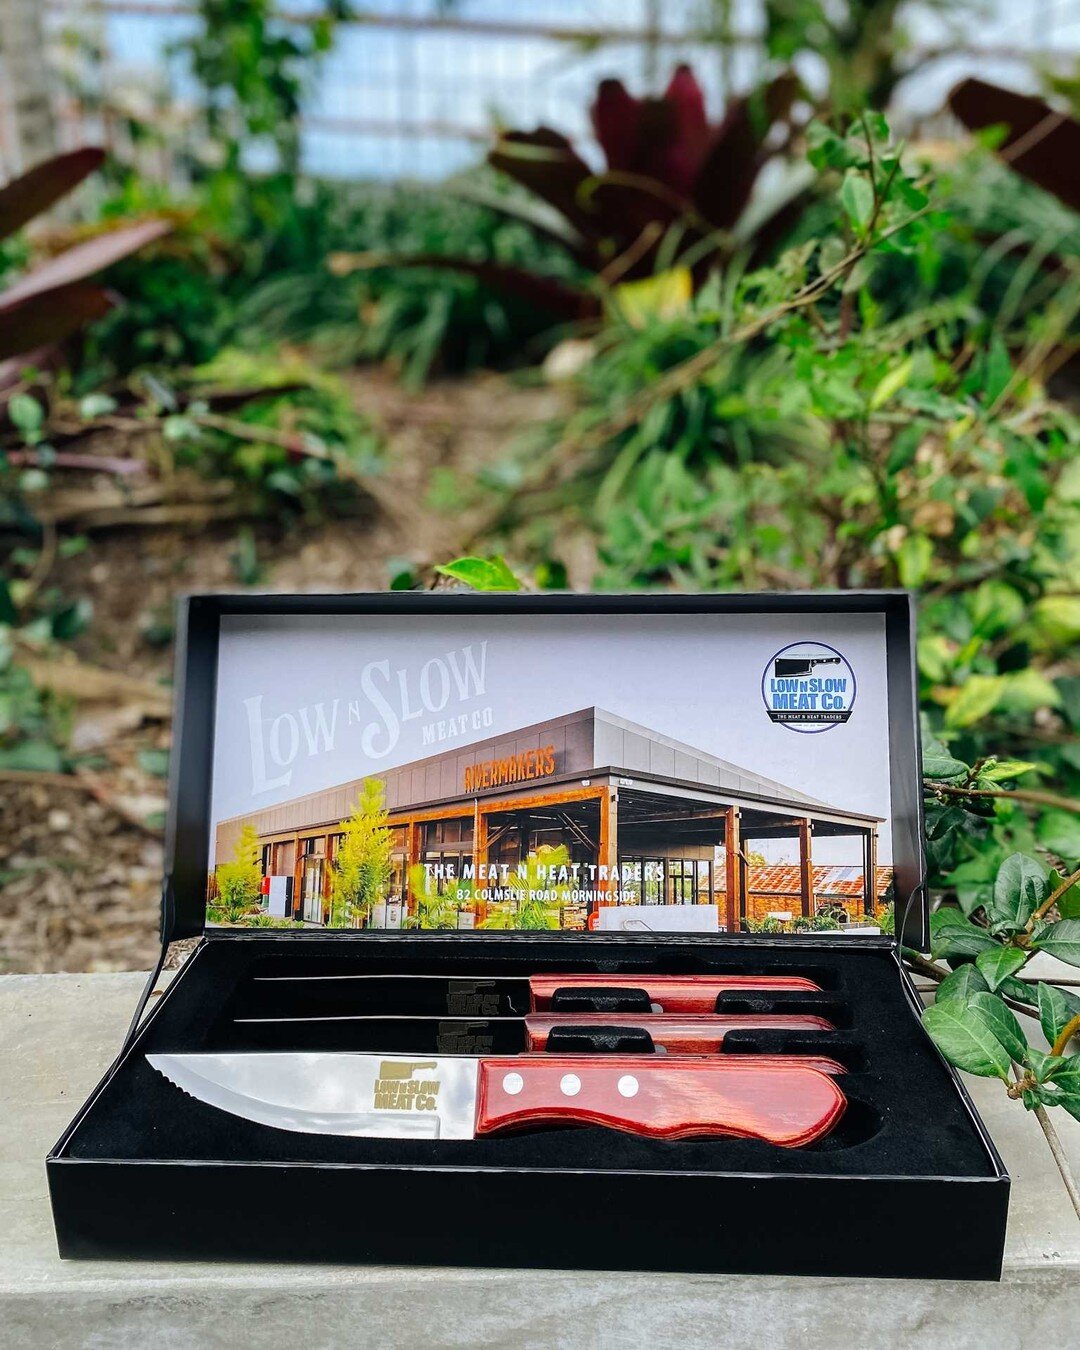 Take your steak game to the next level with our Low n Slow Meat Co. x Tramontina 4pc Steak Knife Set!

We&rsquo;ve had these specially made to celebrate the opening of our new facility, and you can now grab your set online or instore. Link in our bio